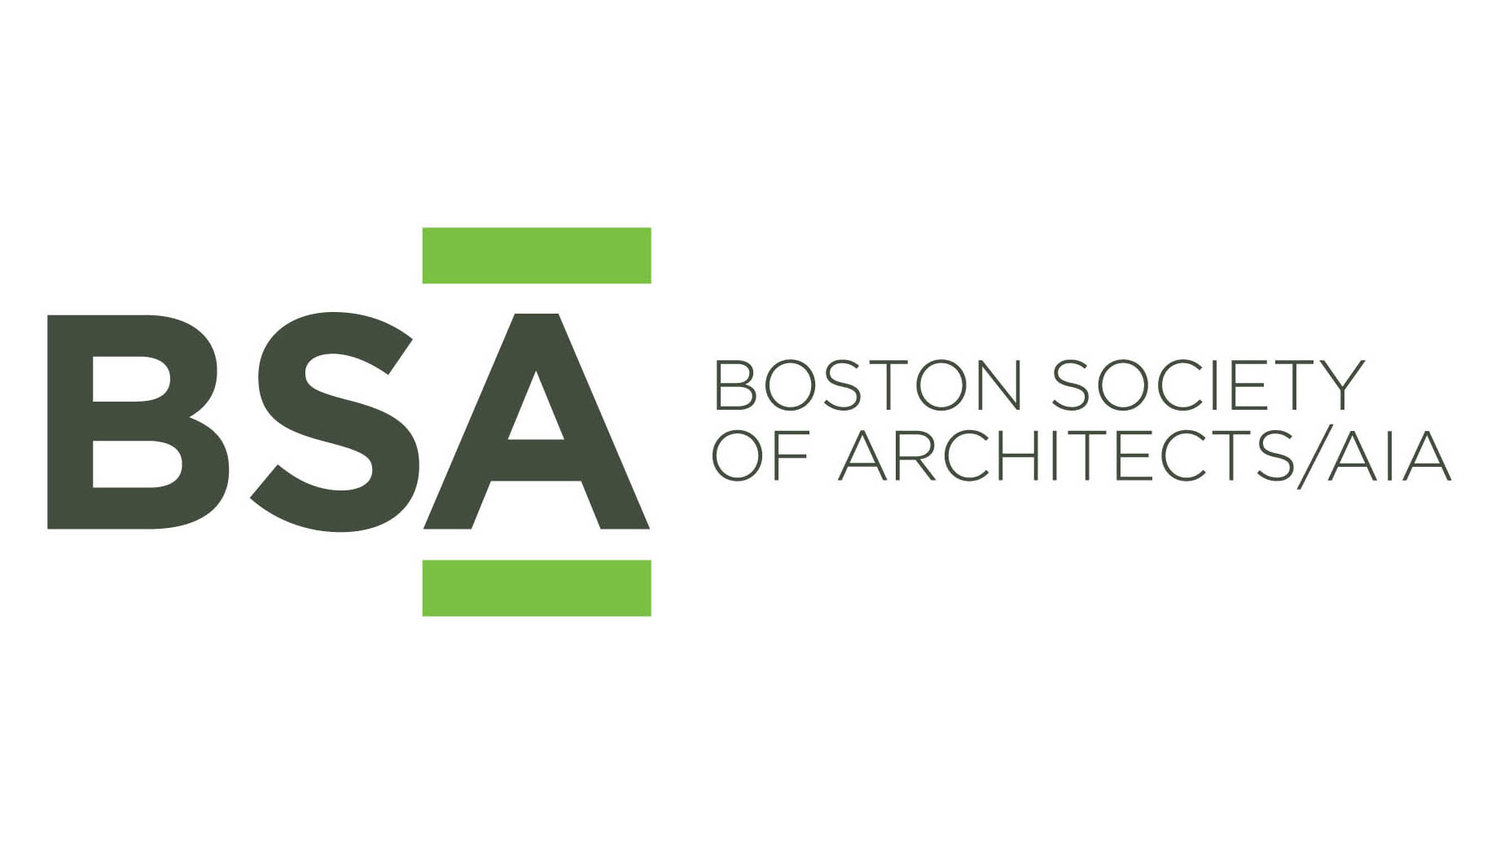 On a white background there are gray words (logo) that reads, "BSA. Boston Society of Architects/AIA"